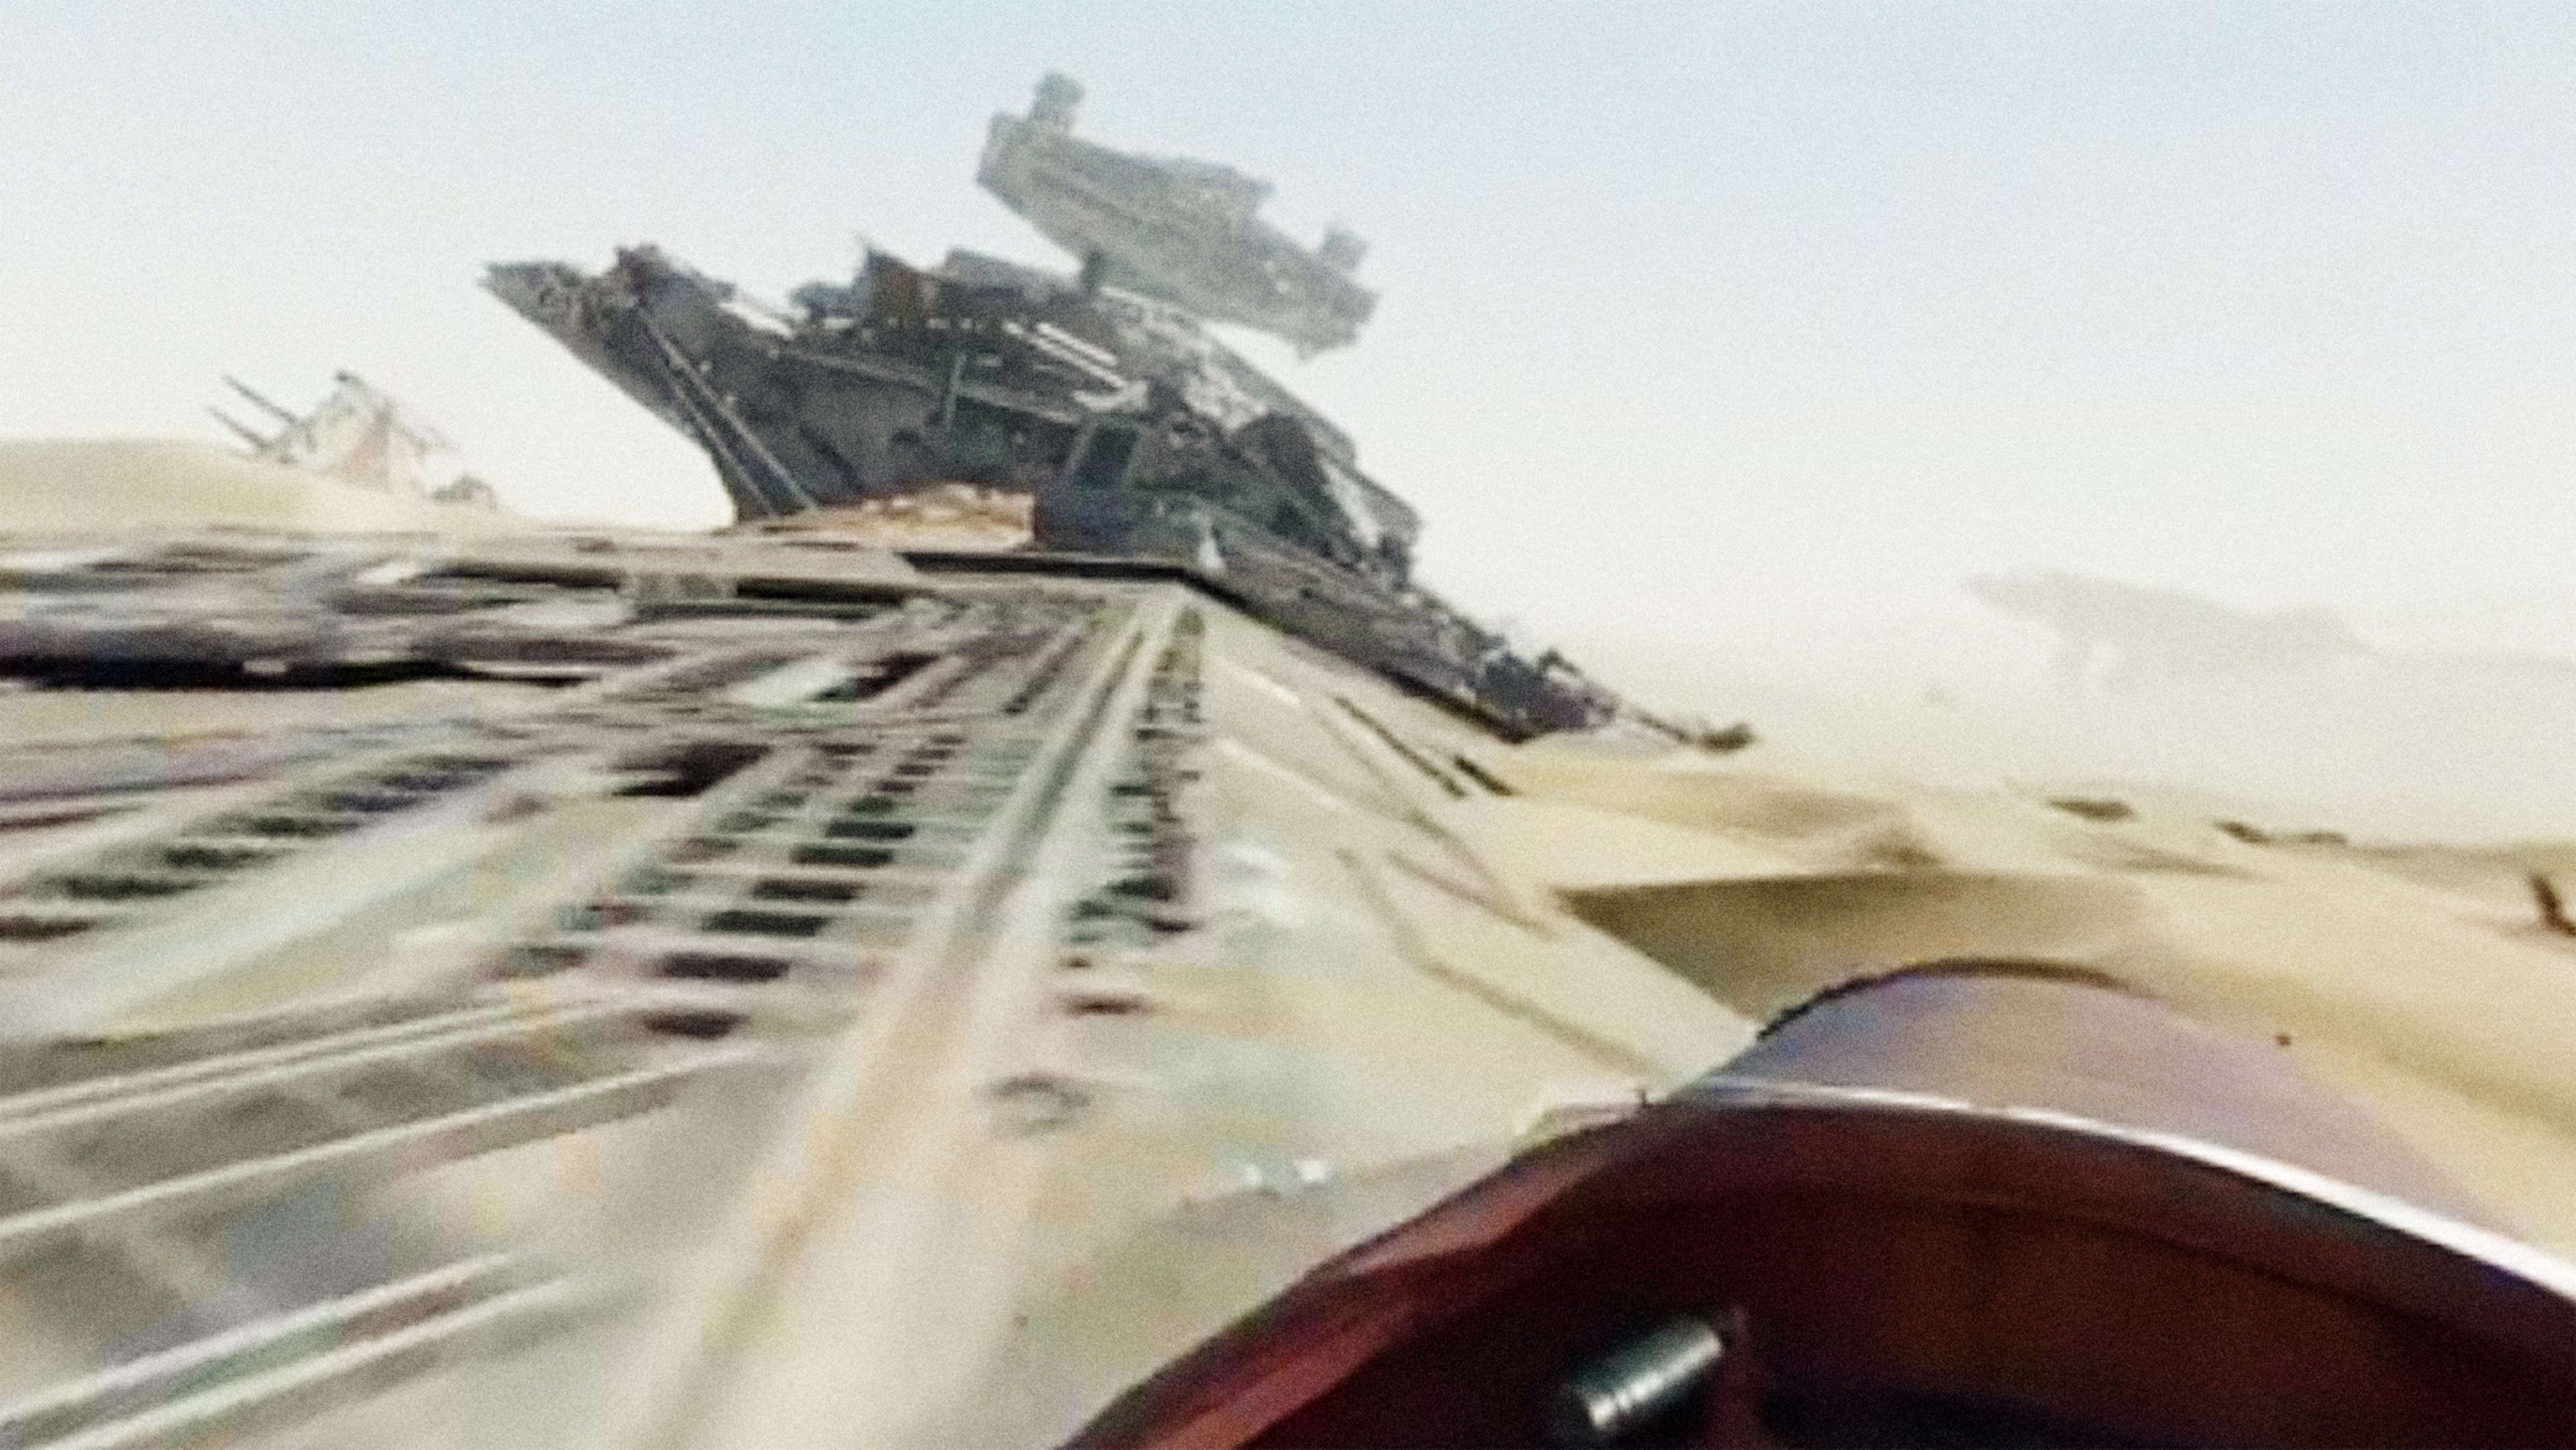 Facebook Brings A 360-Degree Look At The Desert Planet Of “Star Wars: The Force Awakens”